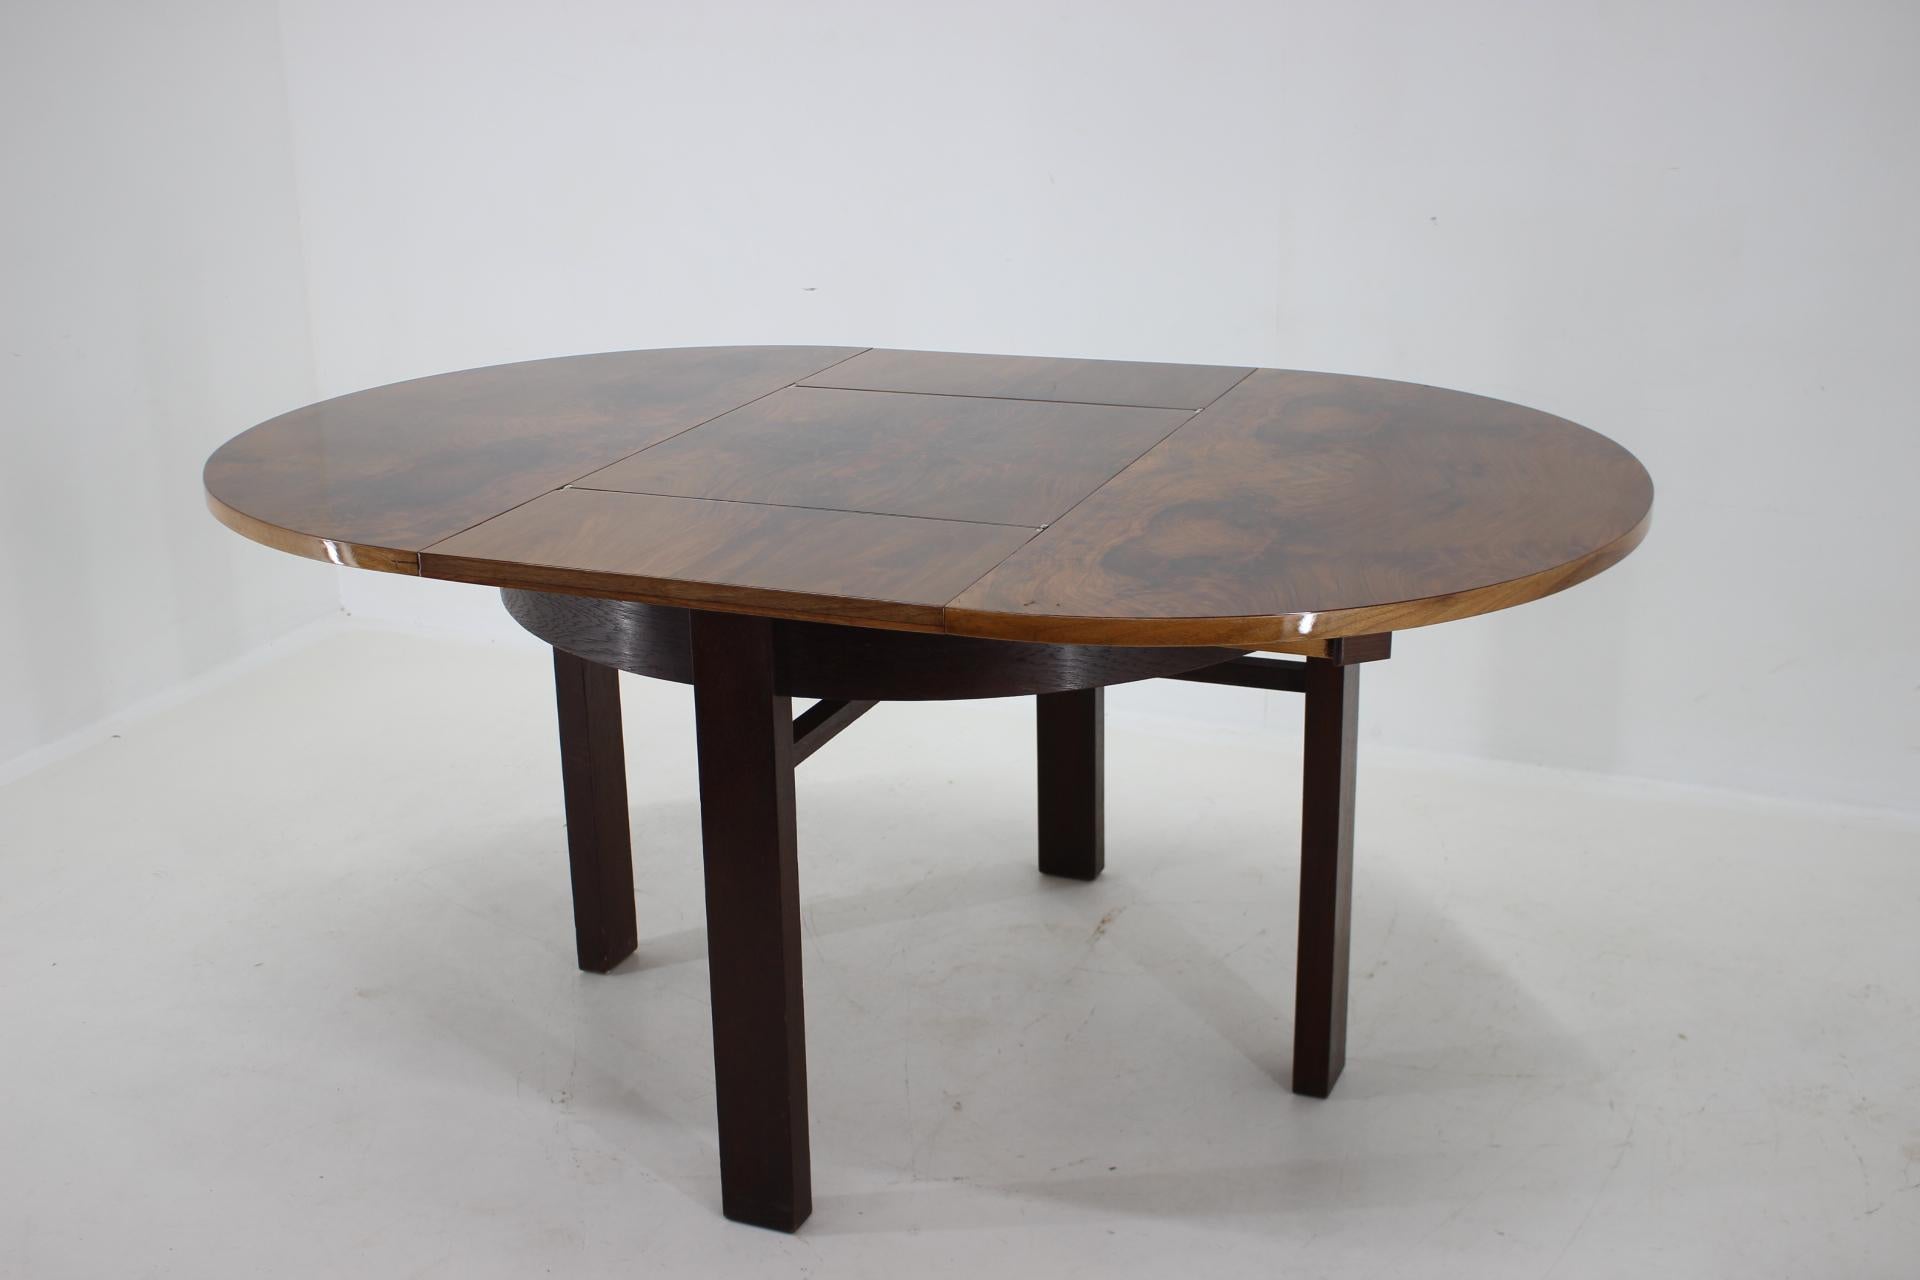 Tchèque 1930s Round /Oval Art Deco Extendable Dining Table in Walnut, Restored  en vente